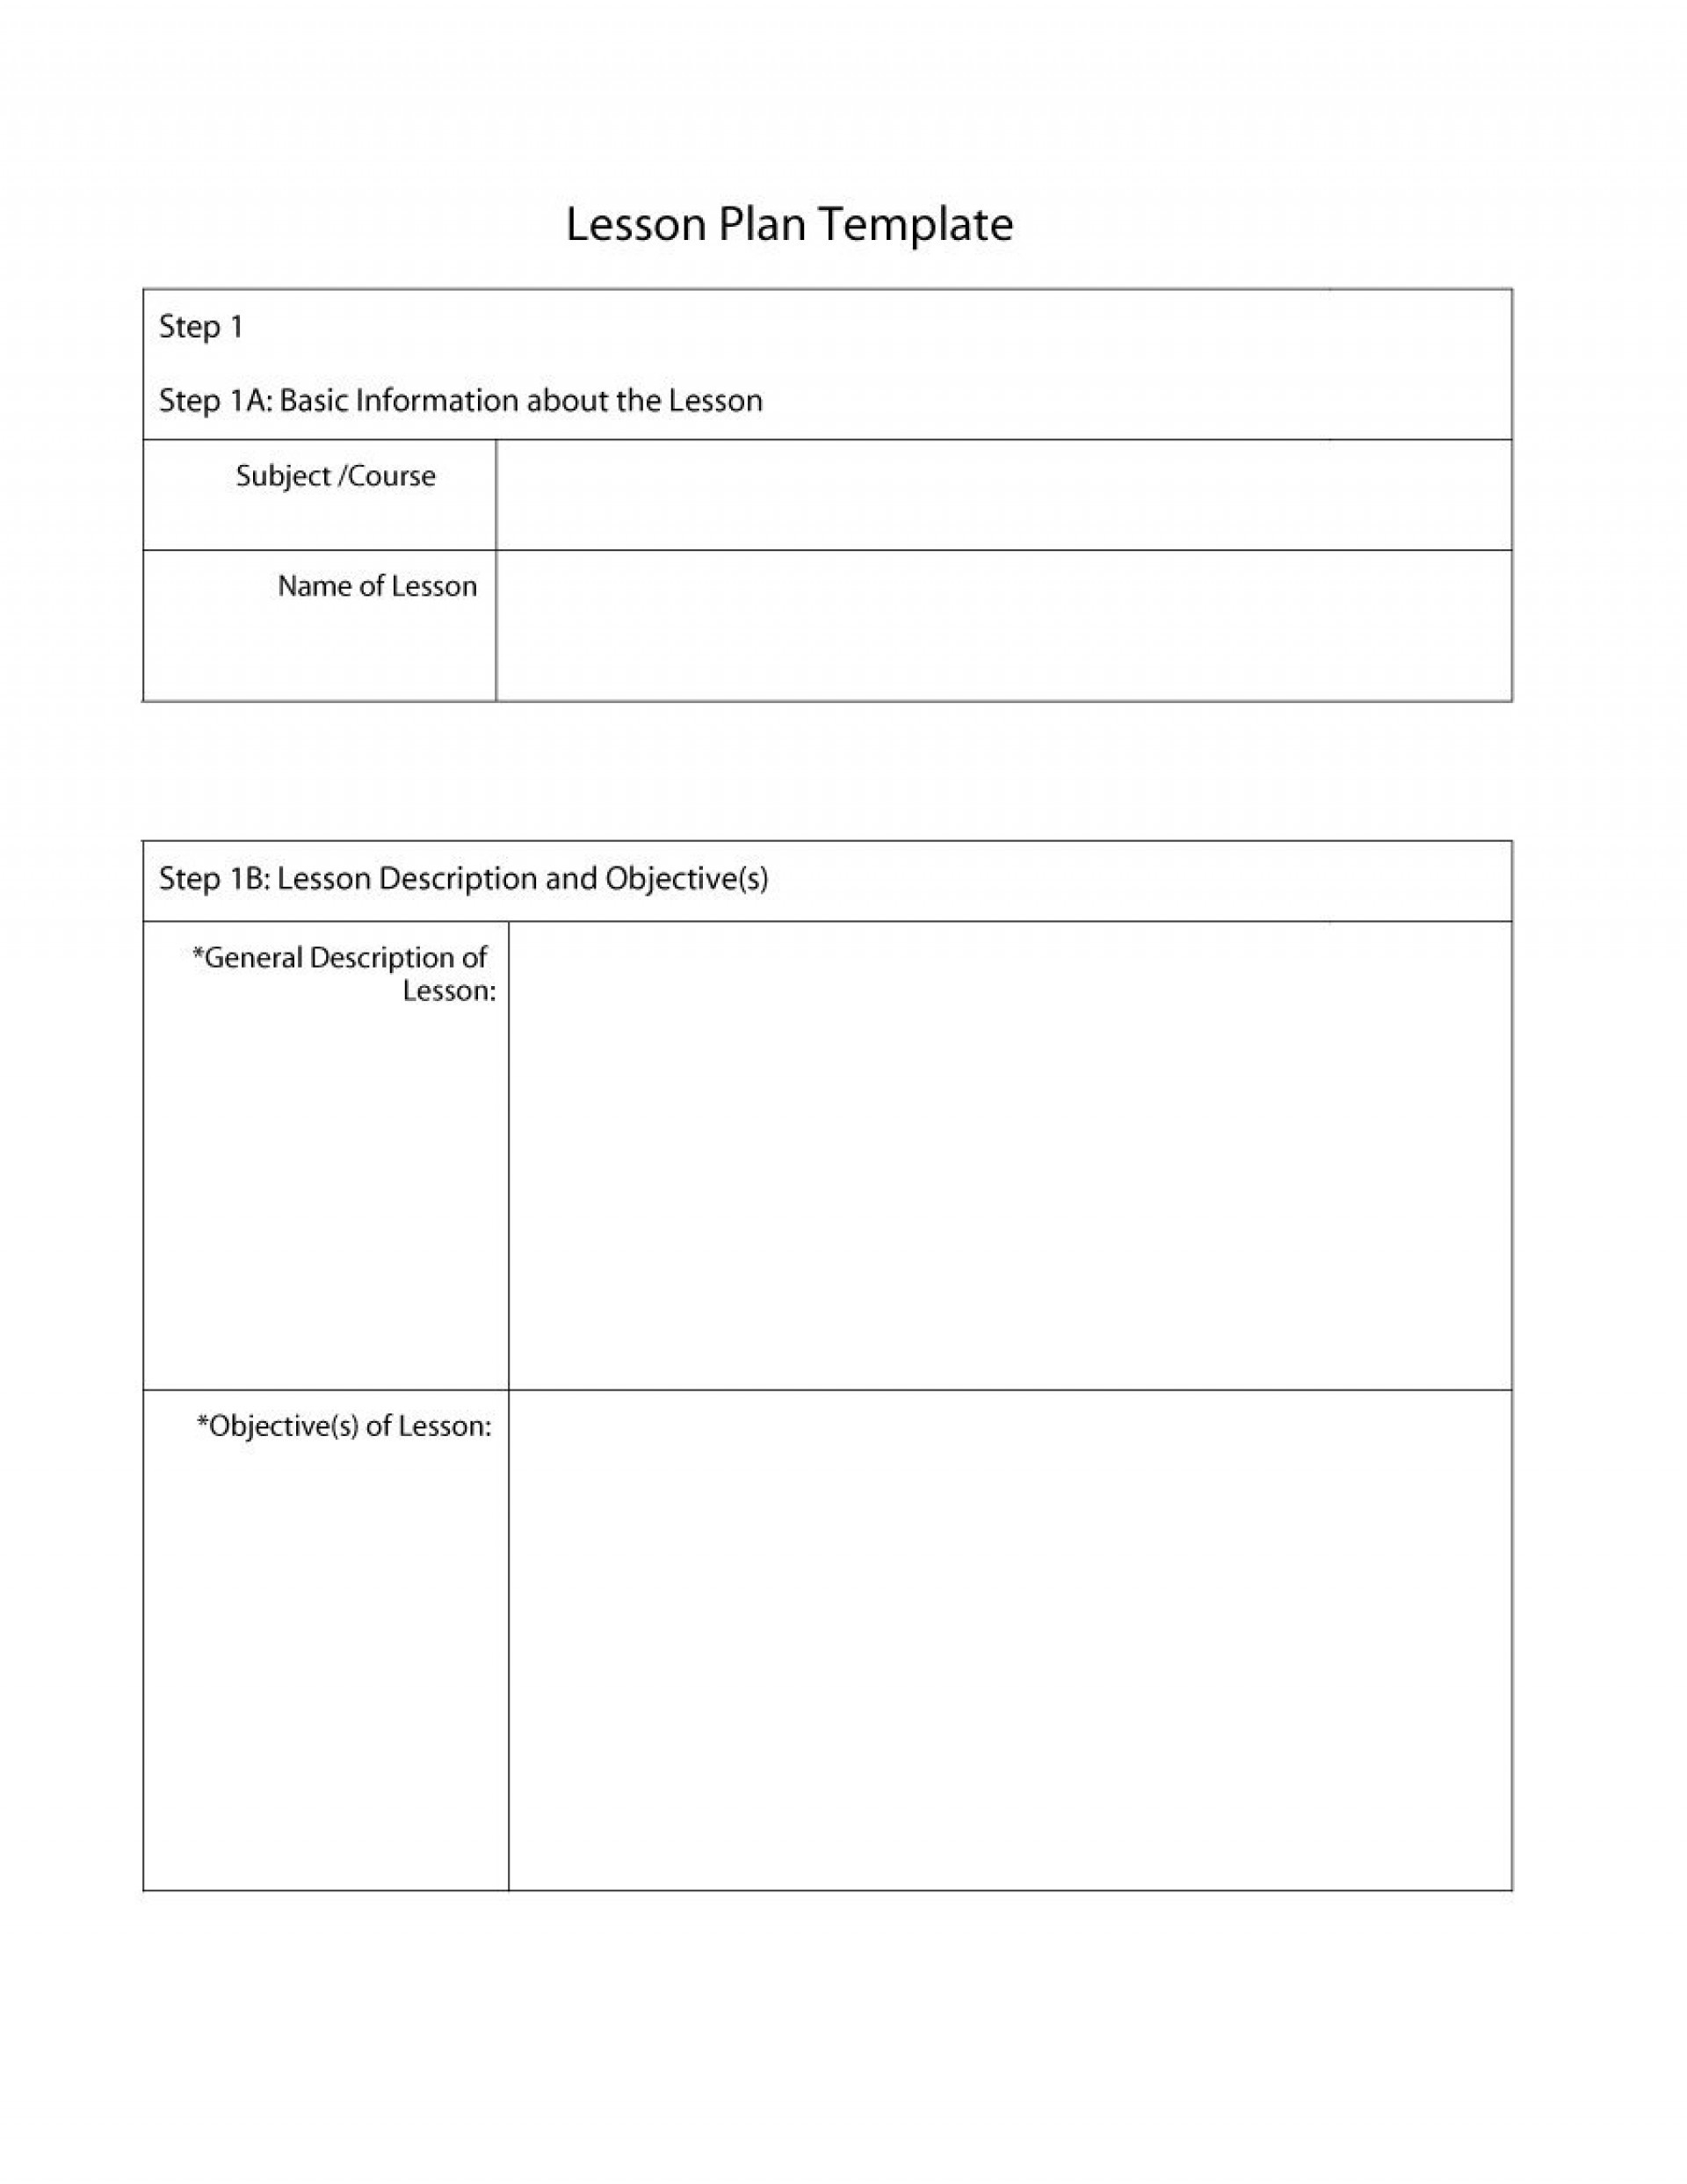 004 Weekly Lesson Plan Template Word On Calendar Excellent-Weekly Lesson Plan Calendar Template